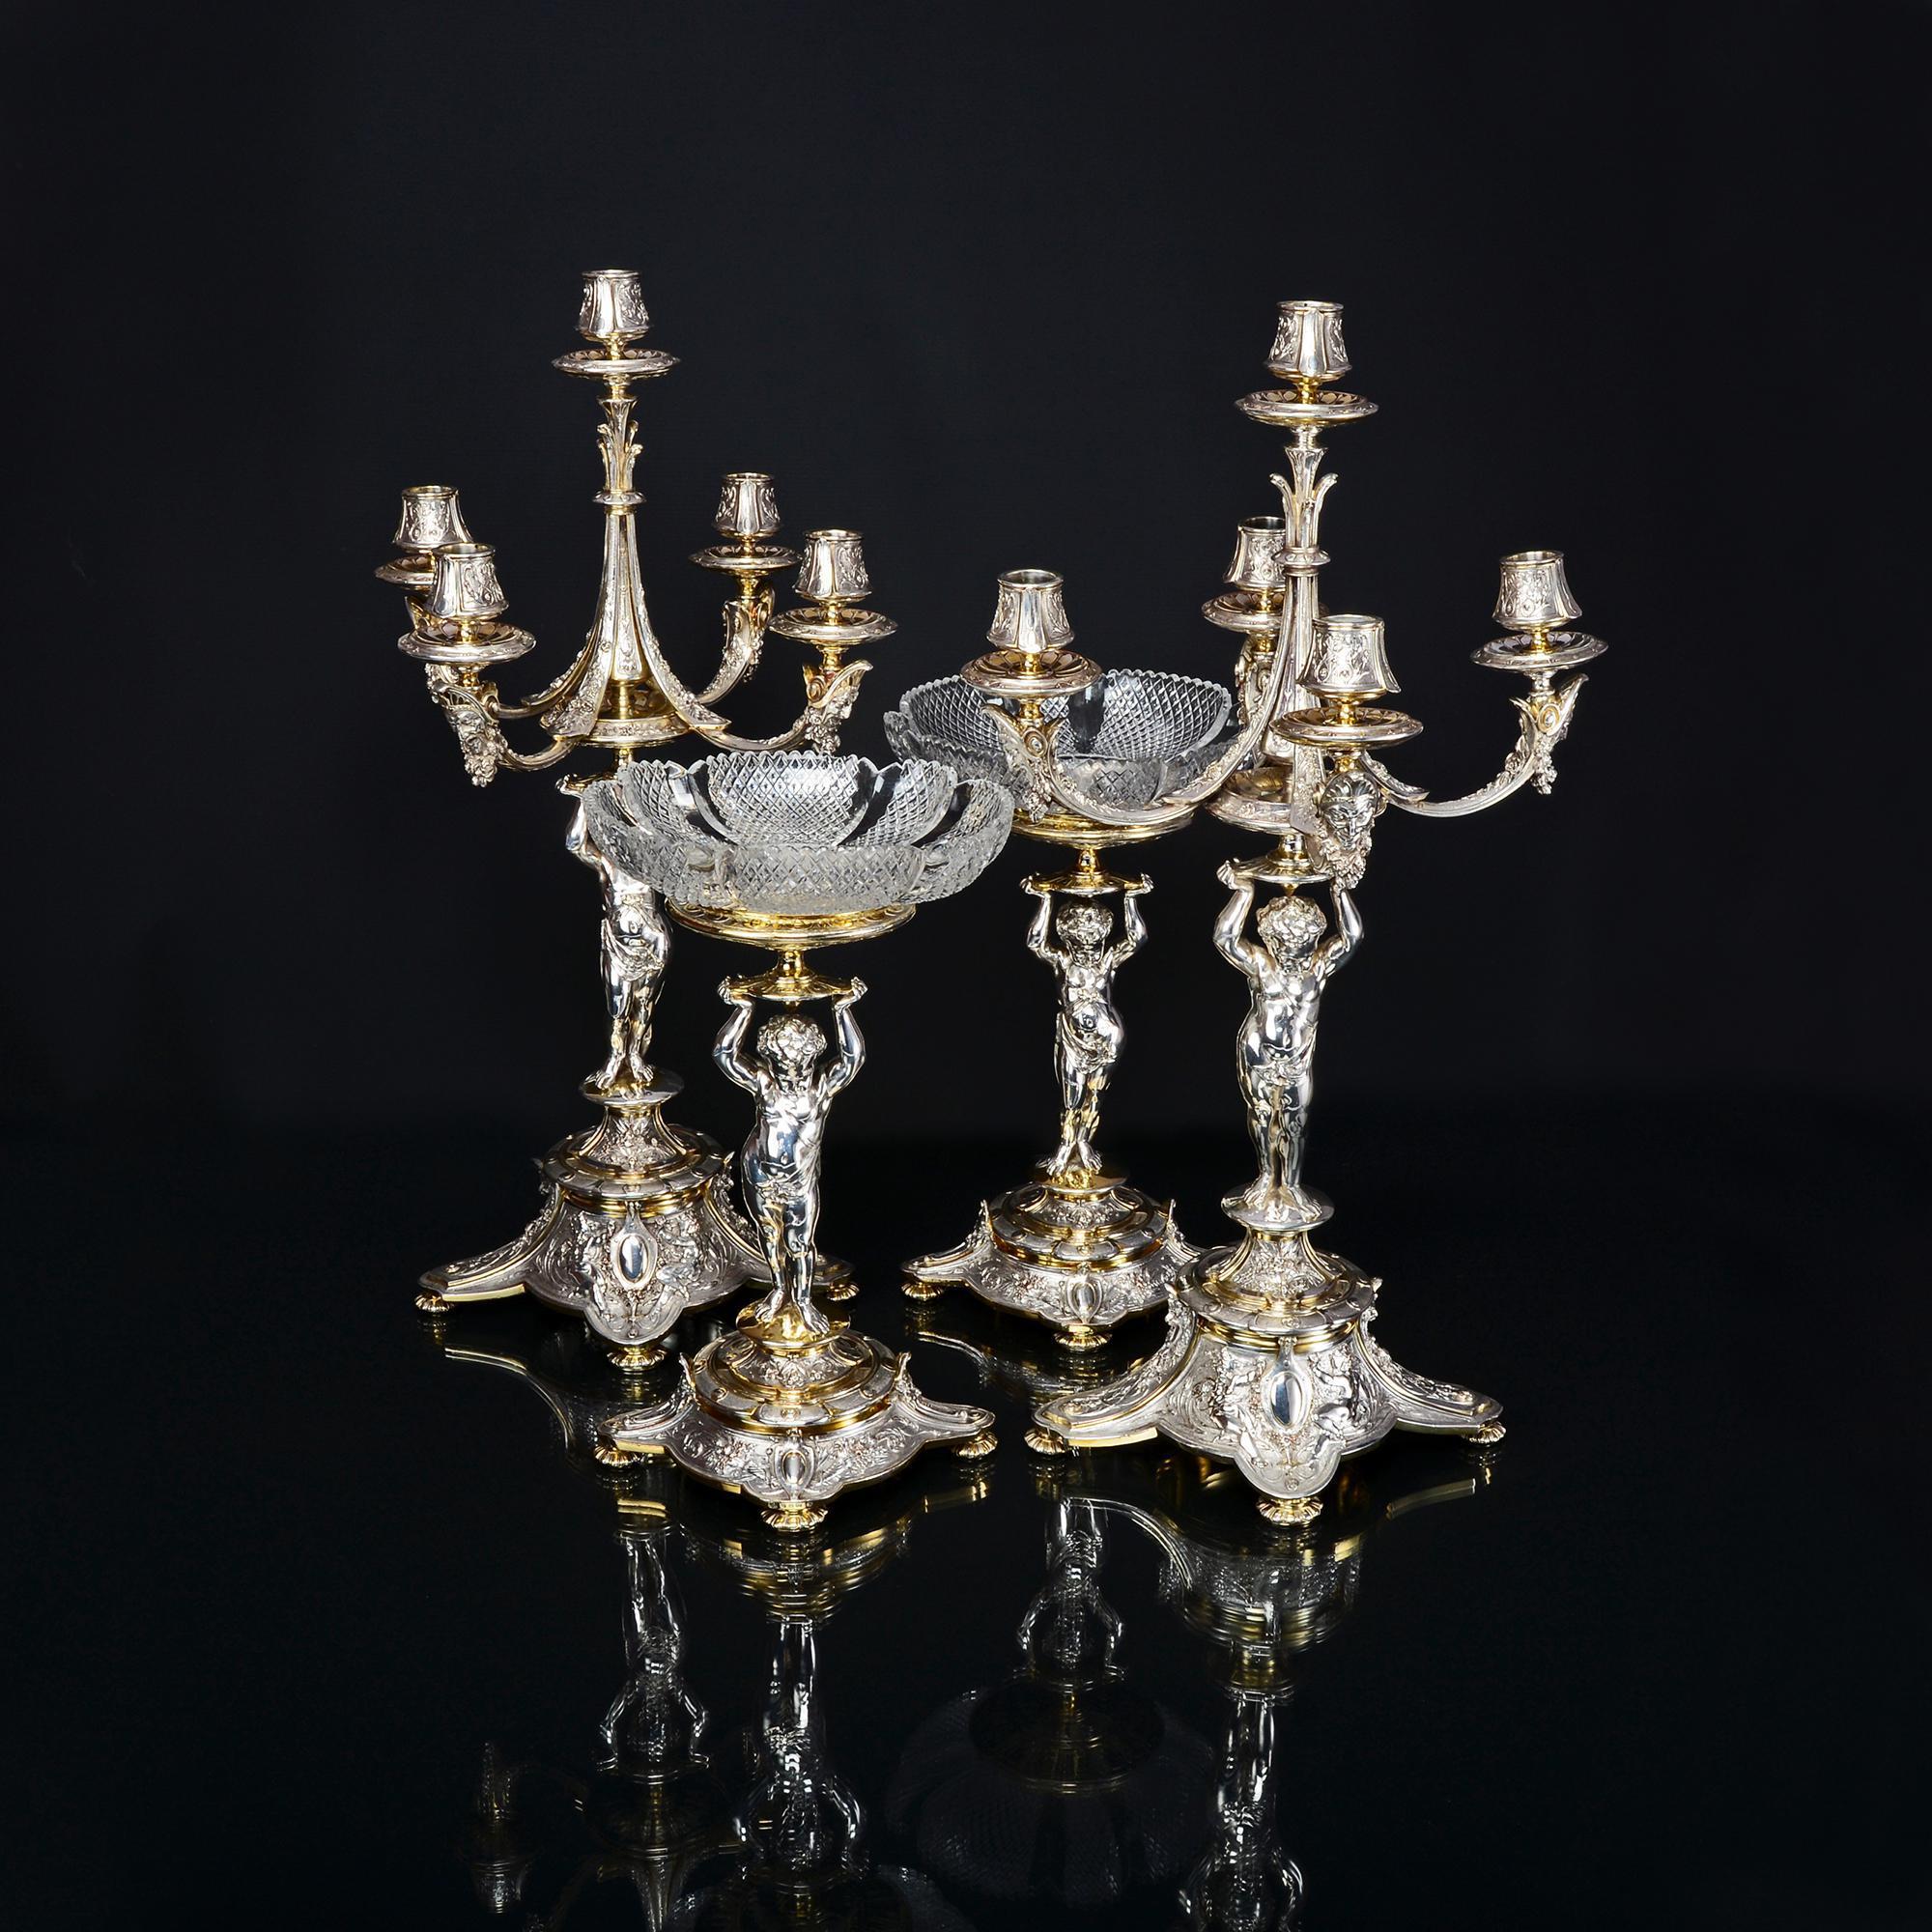 Fine quality and highly decorative suite of silver-plated and partial gilt candelabra and comports. All four pieces have central cast and finely detailed puti or cherubs, each upholding either the branches of the candelabra or the compressed